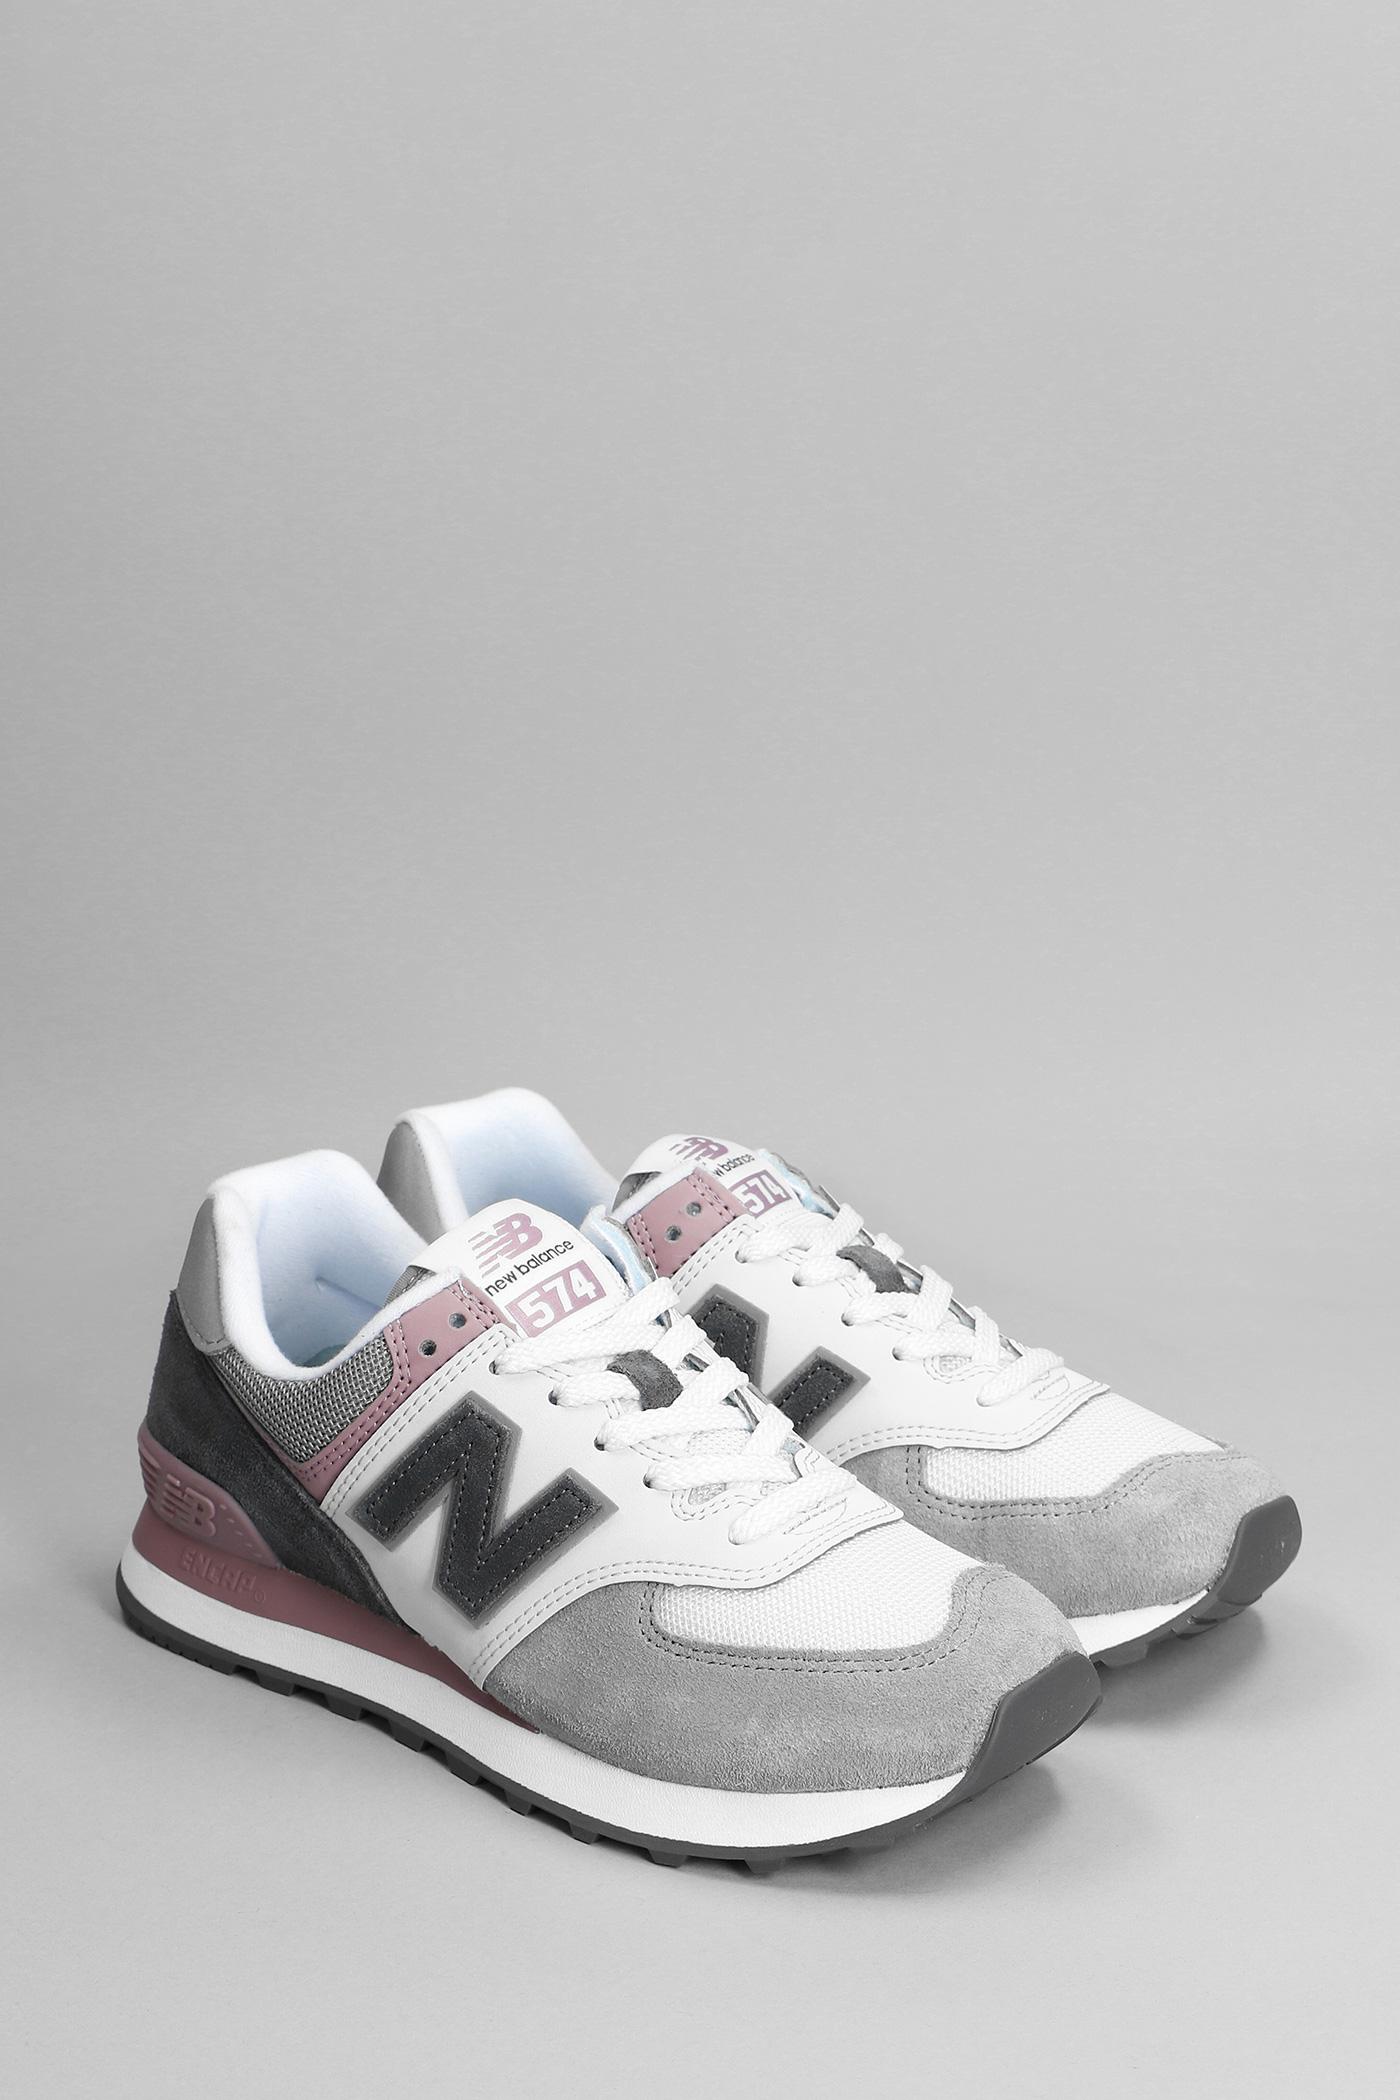 New Balance 574 Sneakers In Grey Suede And Fabric in White | Lyst